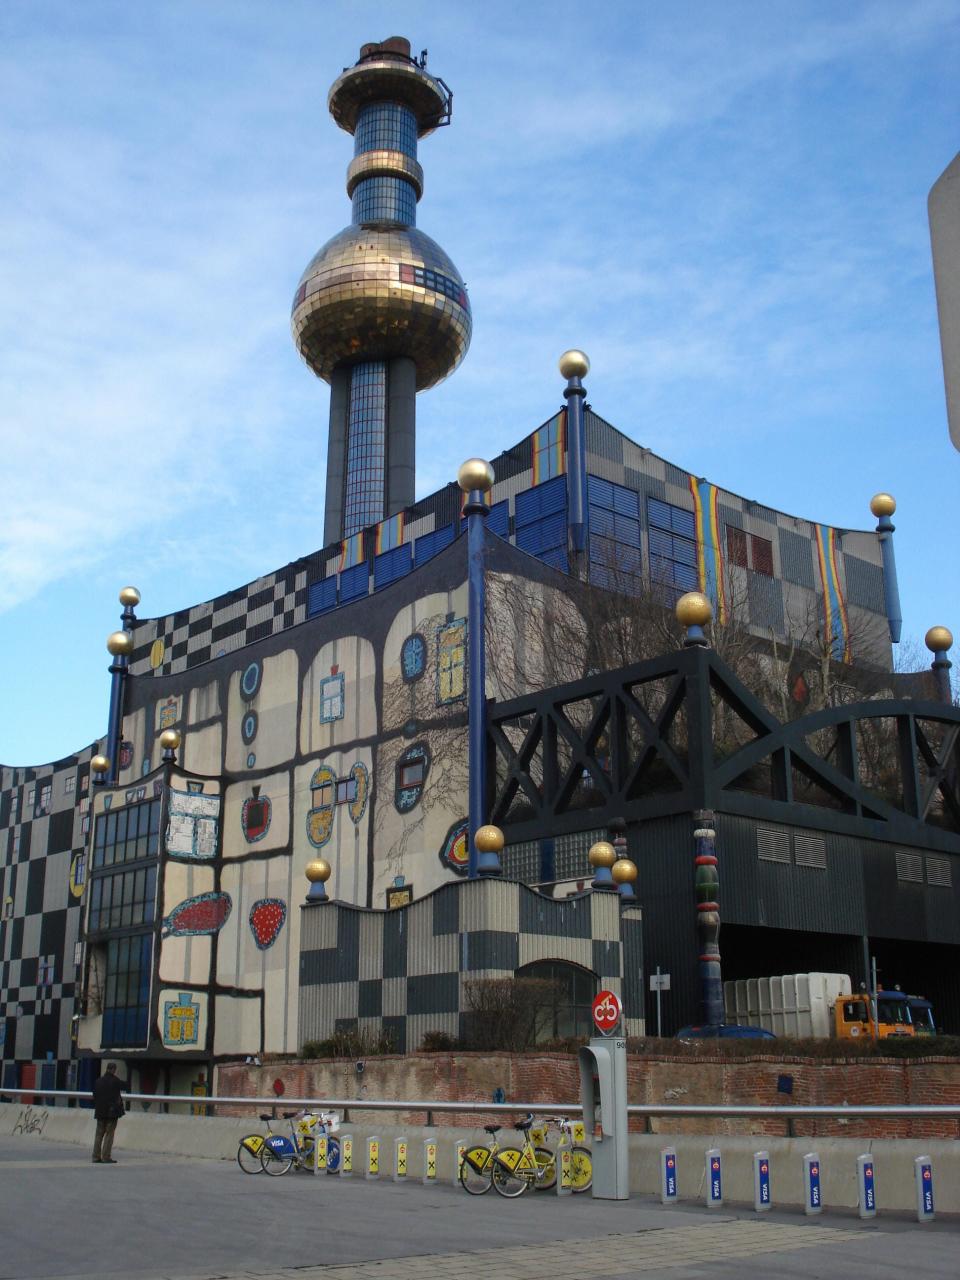 A Knox News reader recently likened this towering structure at a waste disposal facility in Vienna, Austria, to the Sunsphere built for the 1982 World's Fair in downtown Knoxville.